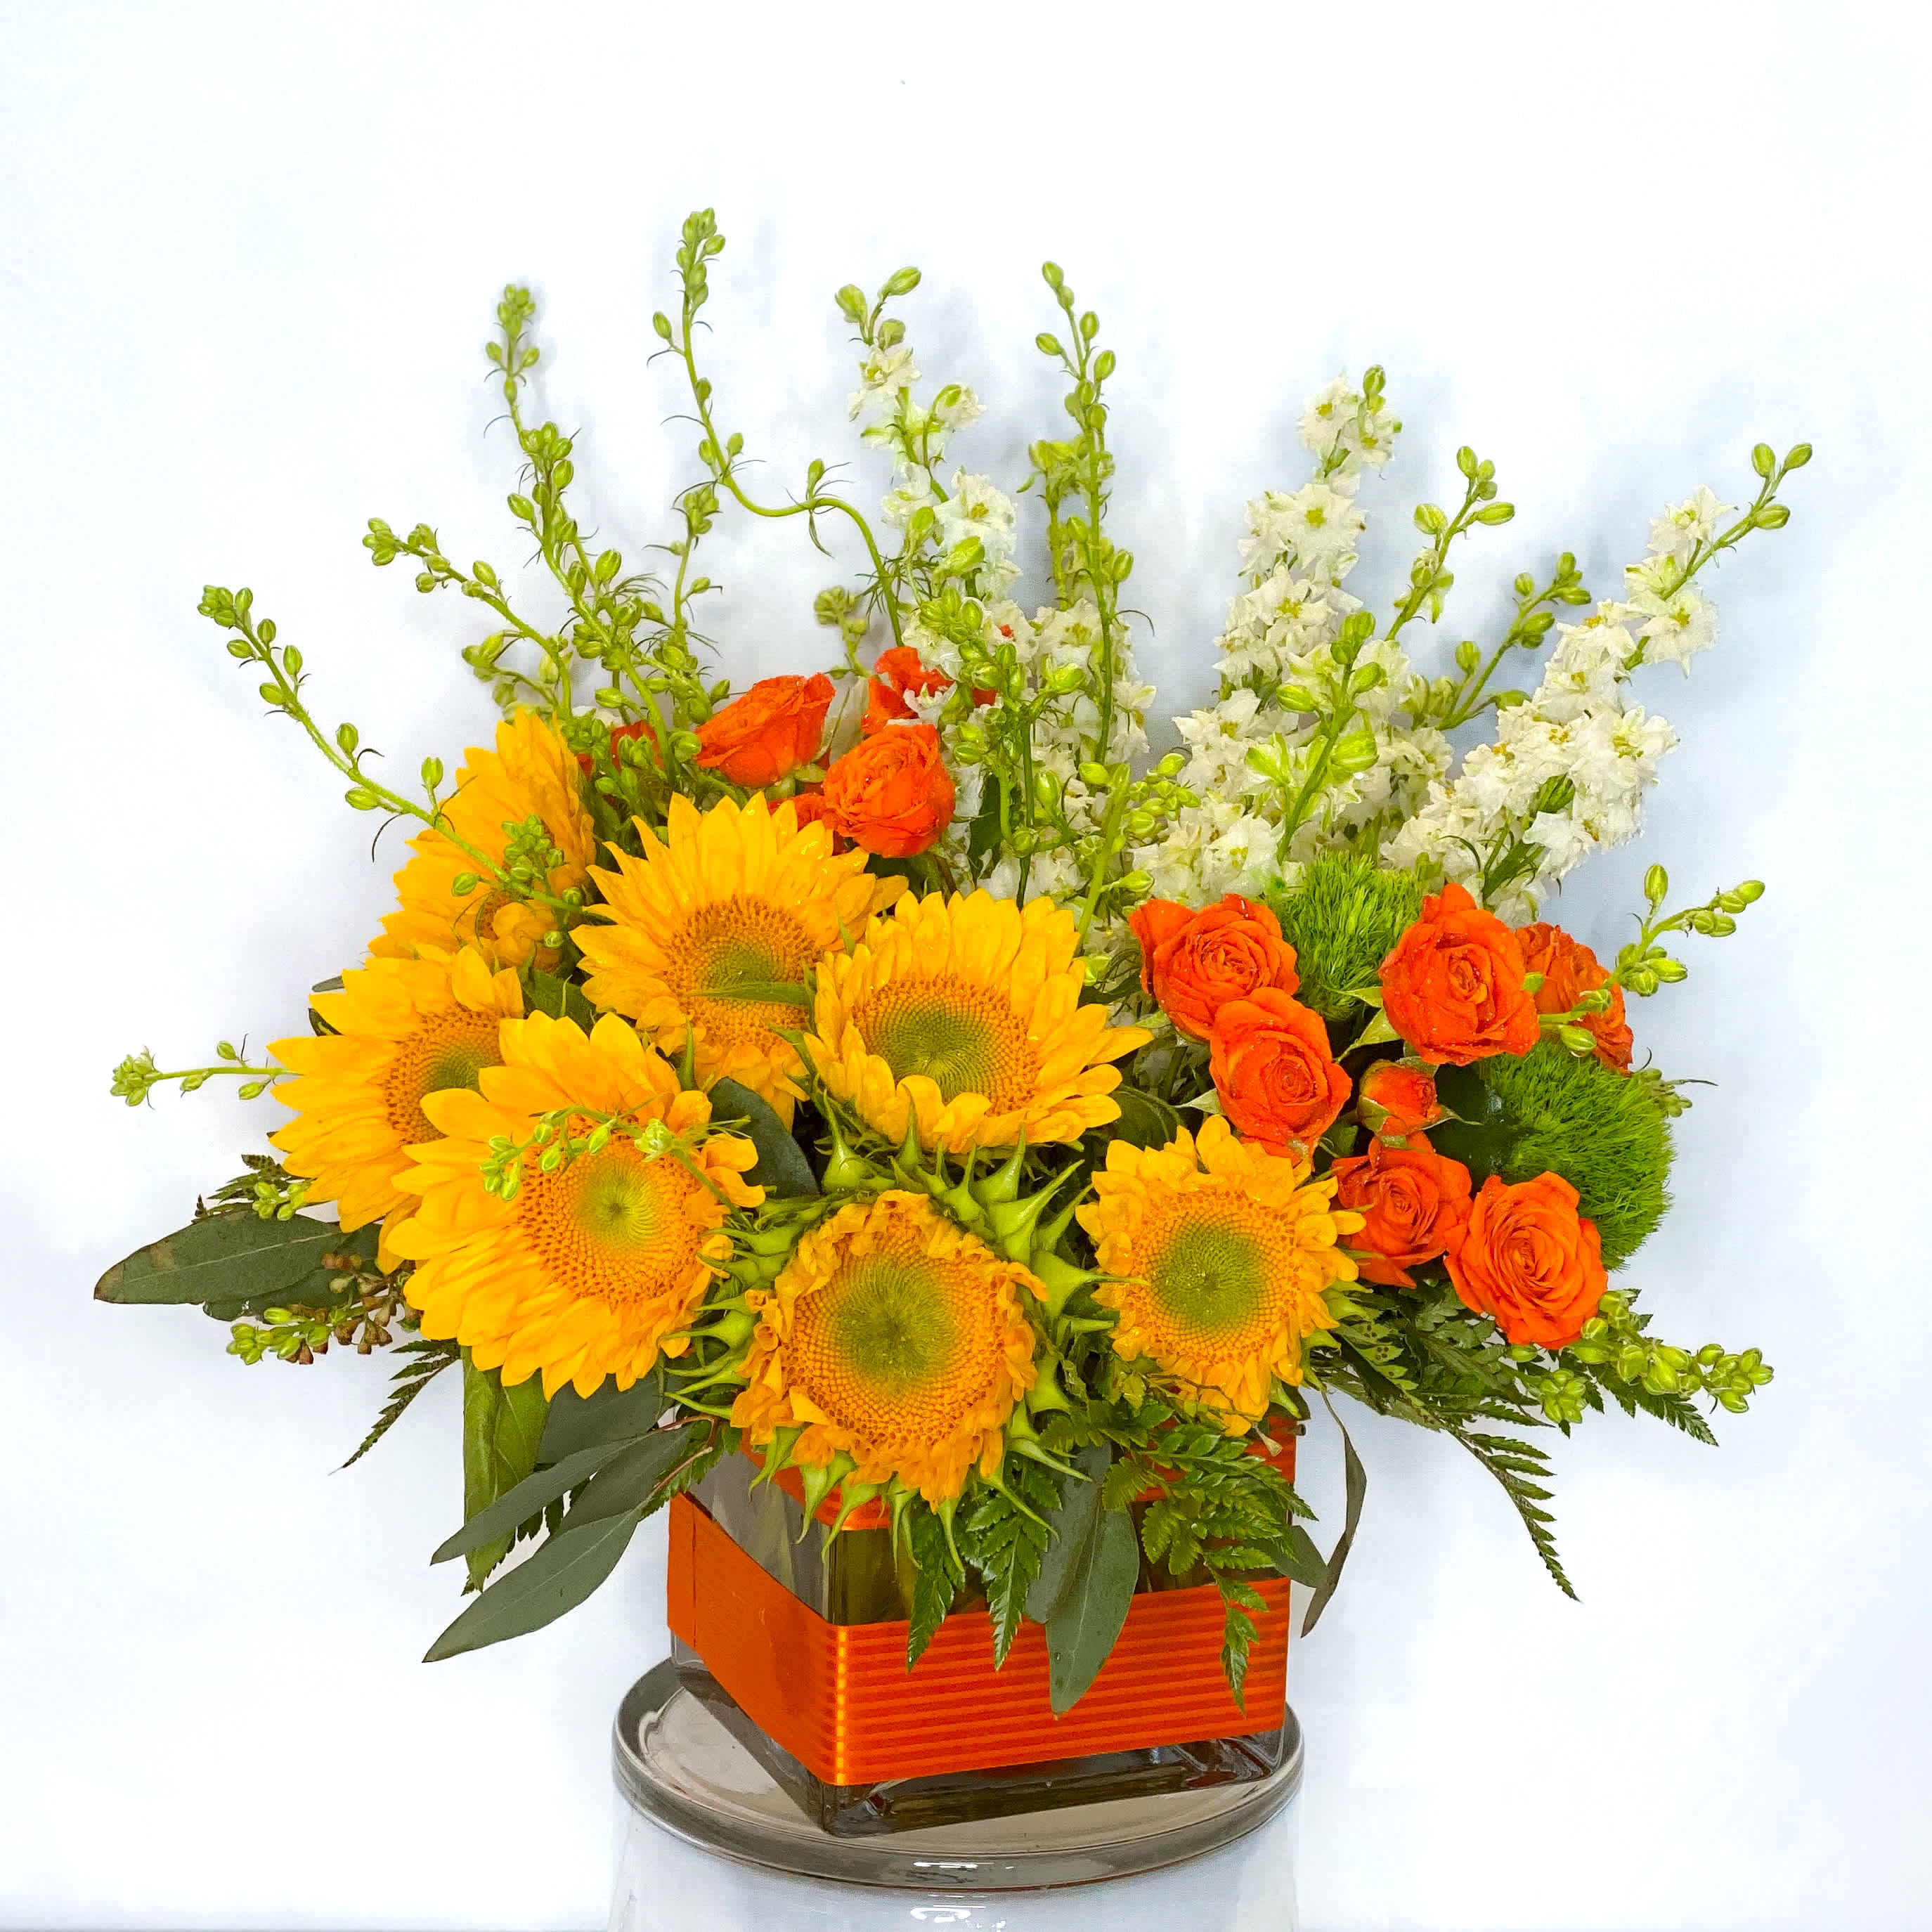 Perfect Sun  - Bright and lovely sunflowers arranged in a centerpiece style with orange equadorian roses, yellow snapdragon stems, green hypericum berries and lush greens. Gorgeously situated in a clear glass cubed vase accented with an orange woven edge grosgrain ribbon. This bouquet will be a warm wish of happiness for your special someone.   Approximately 14&quot; H x 10&quot; W